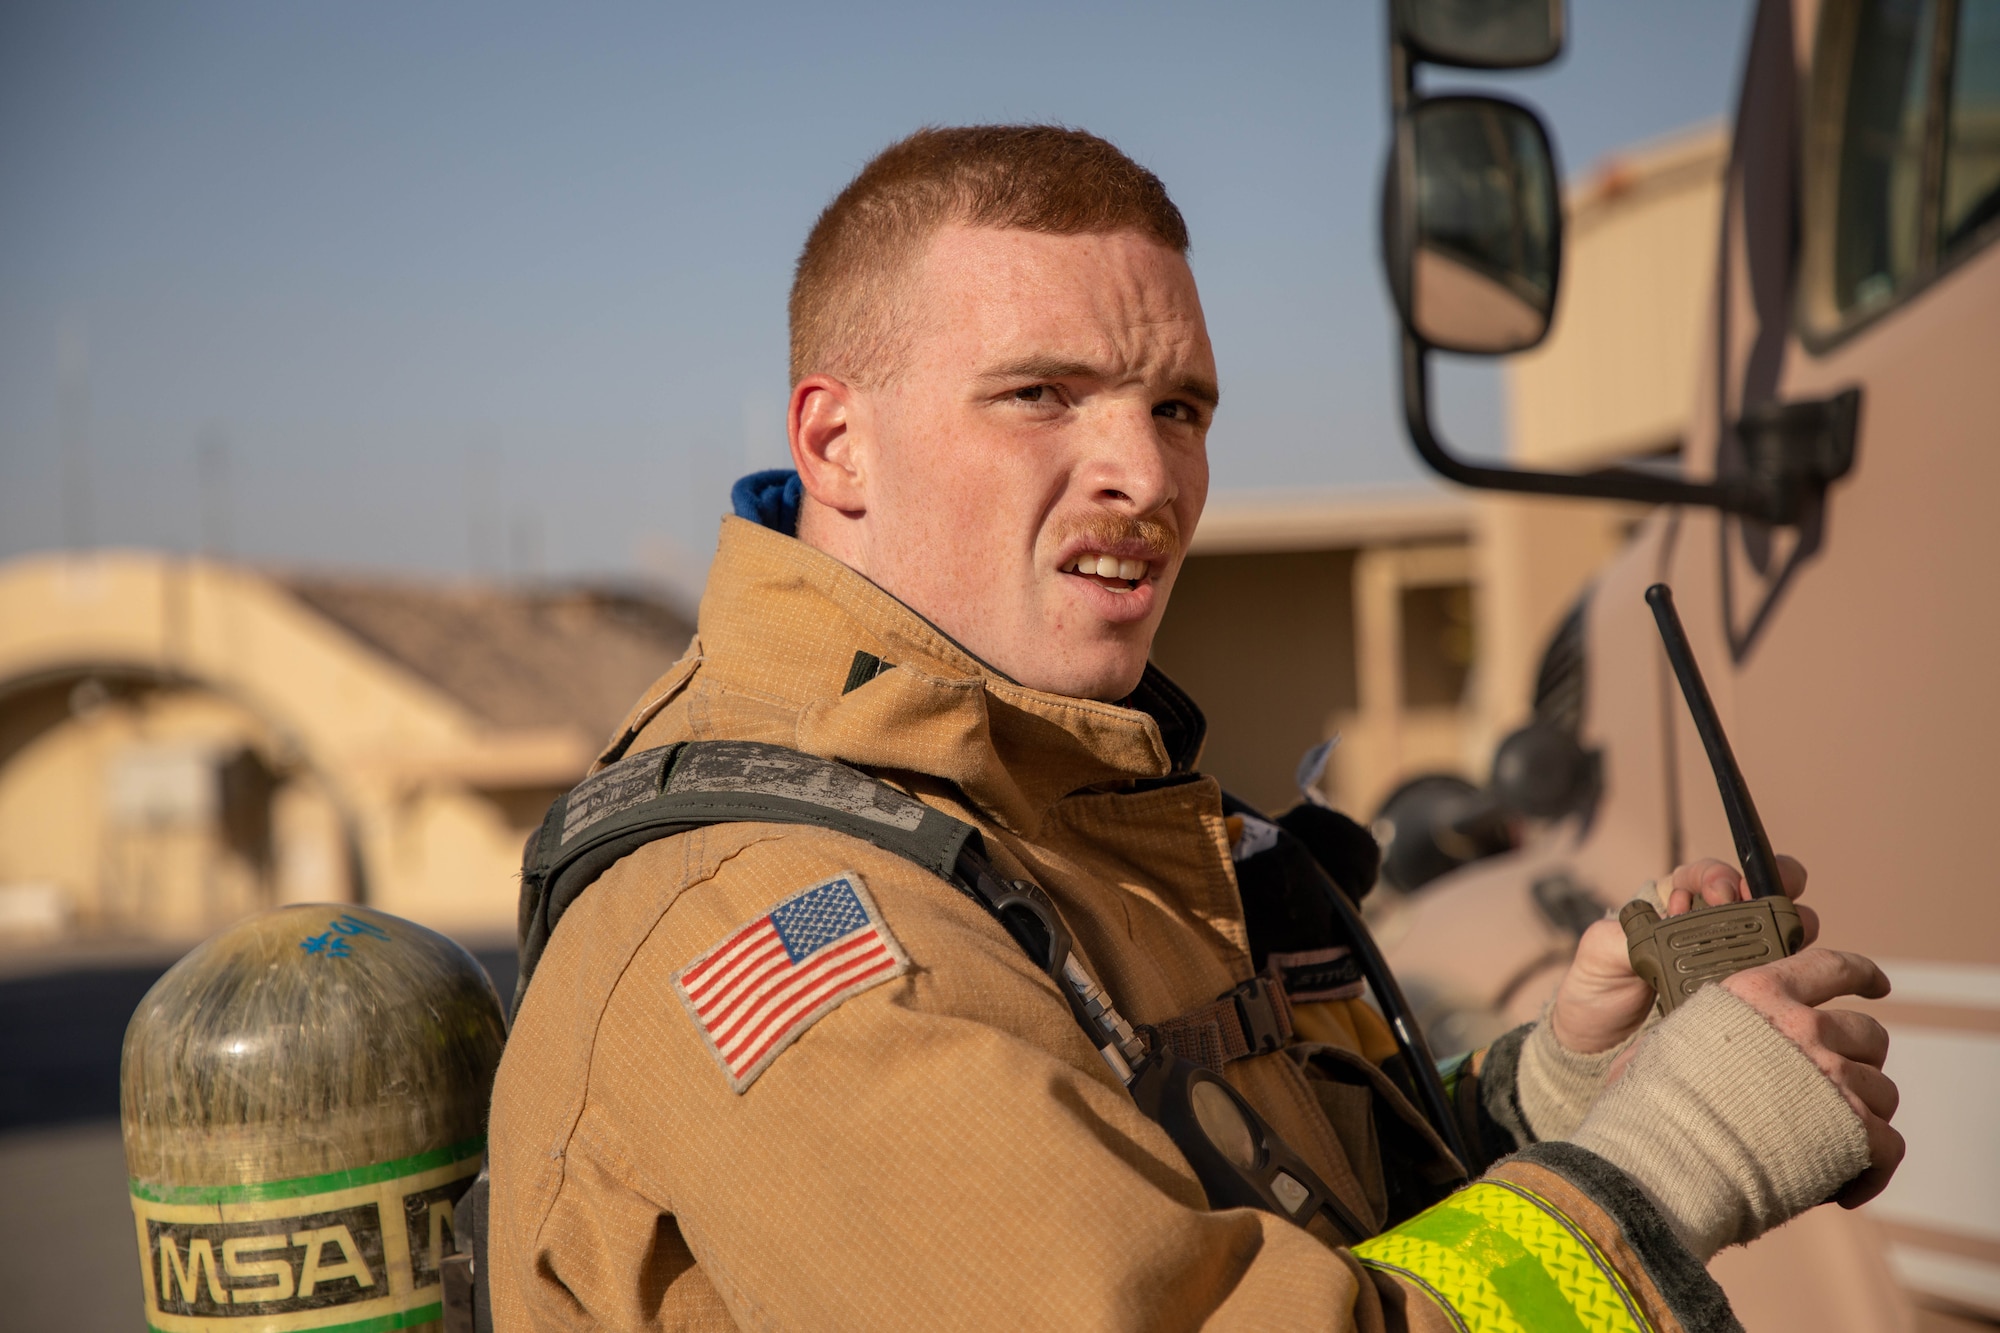 U.S. Air Force Staff Sgt. Michael Coleman, 386th Expeditionary Civil Engineer Squadron crew chief, relays fire and medical evacuation information during the Air and Missile Defense Exercise 21-1 at Ali Al Salem Air Base, Kuwait, Oct. 22, 2020.